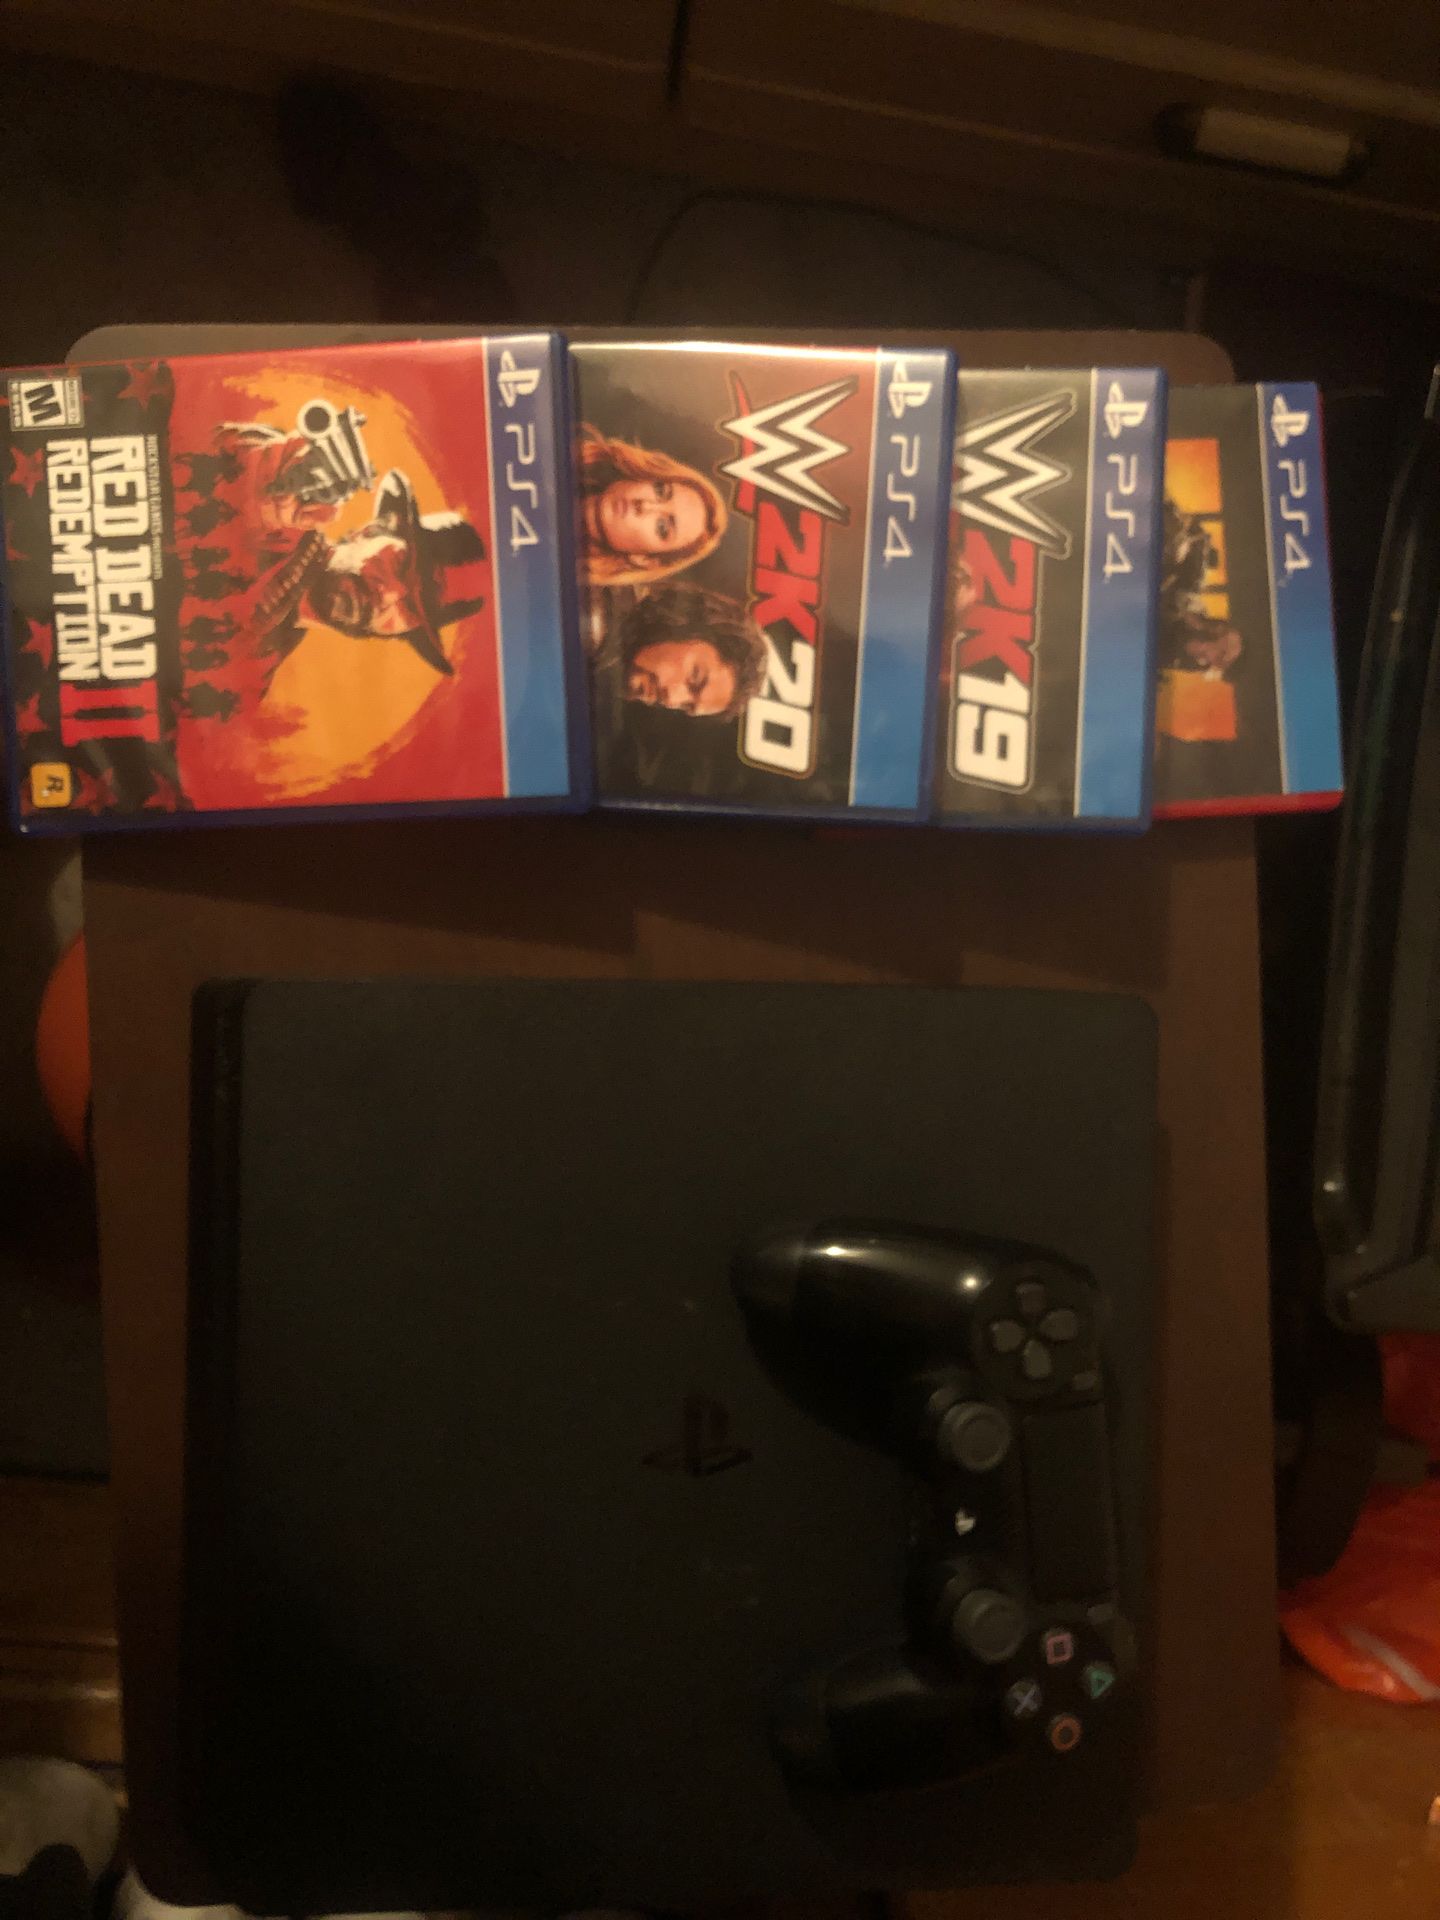 PlayStation 4 with 4 games included